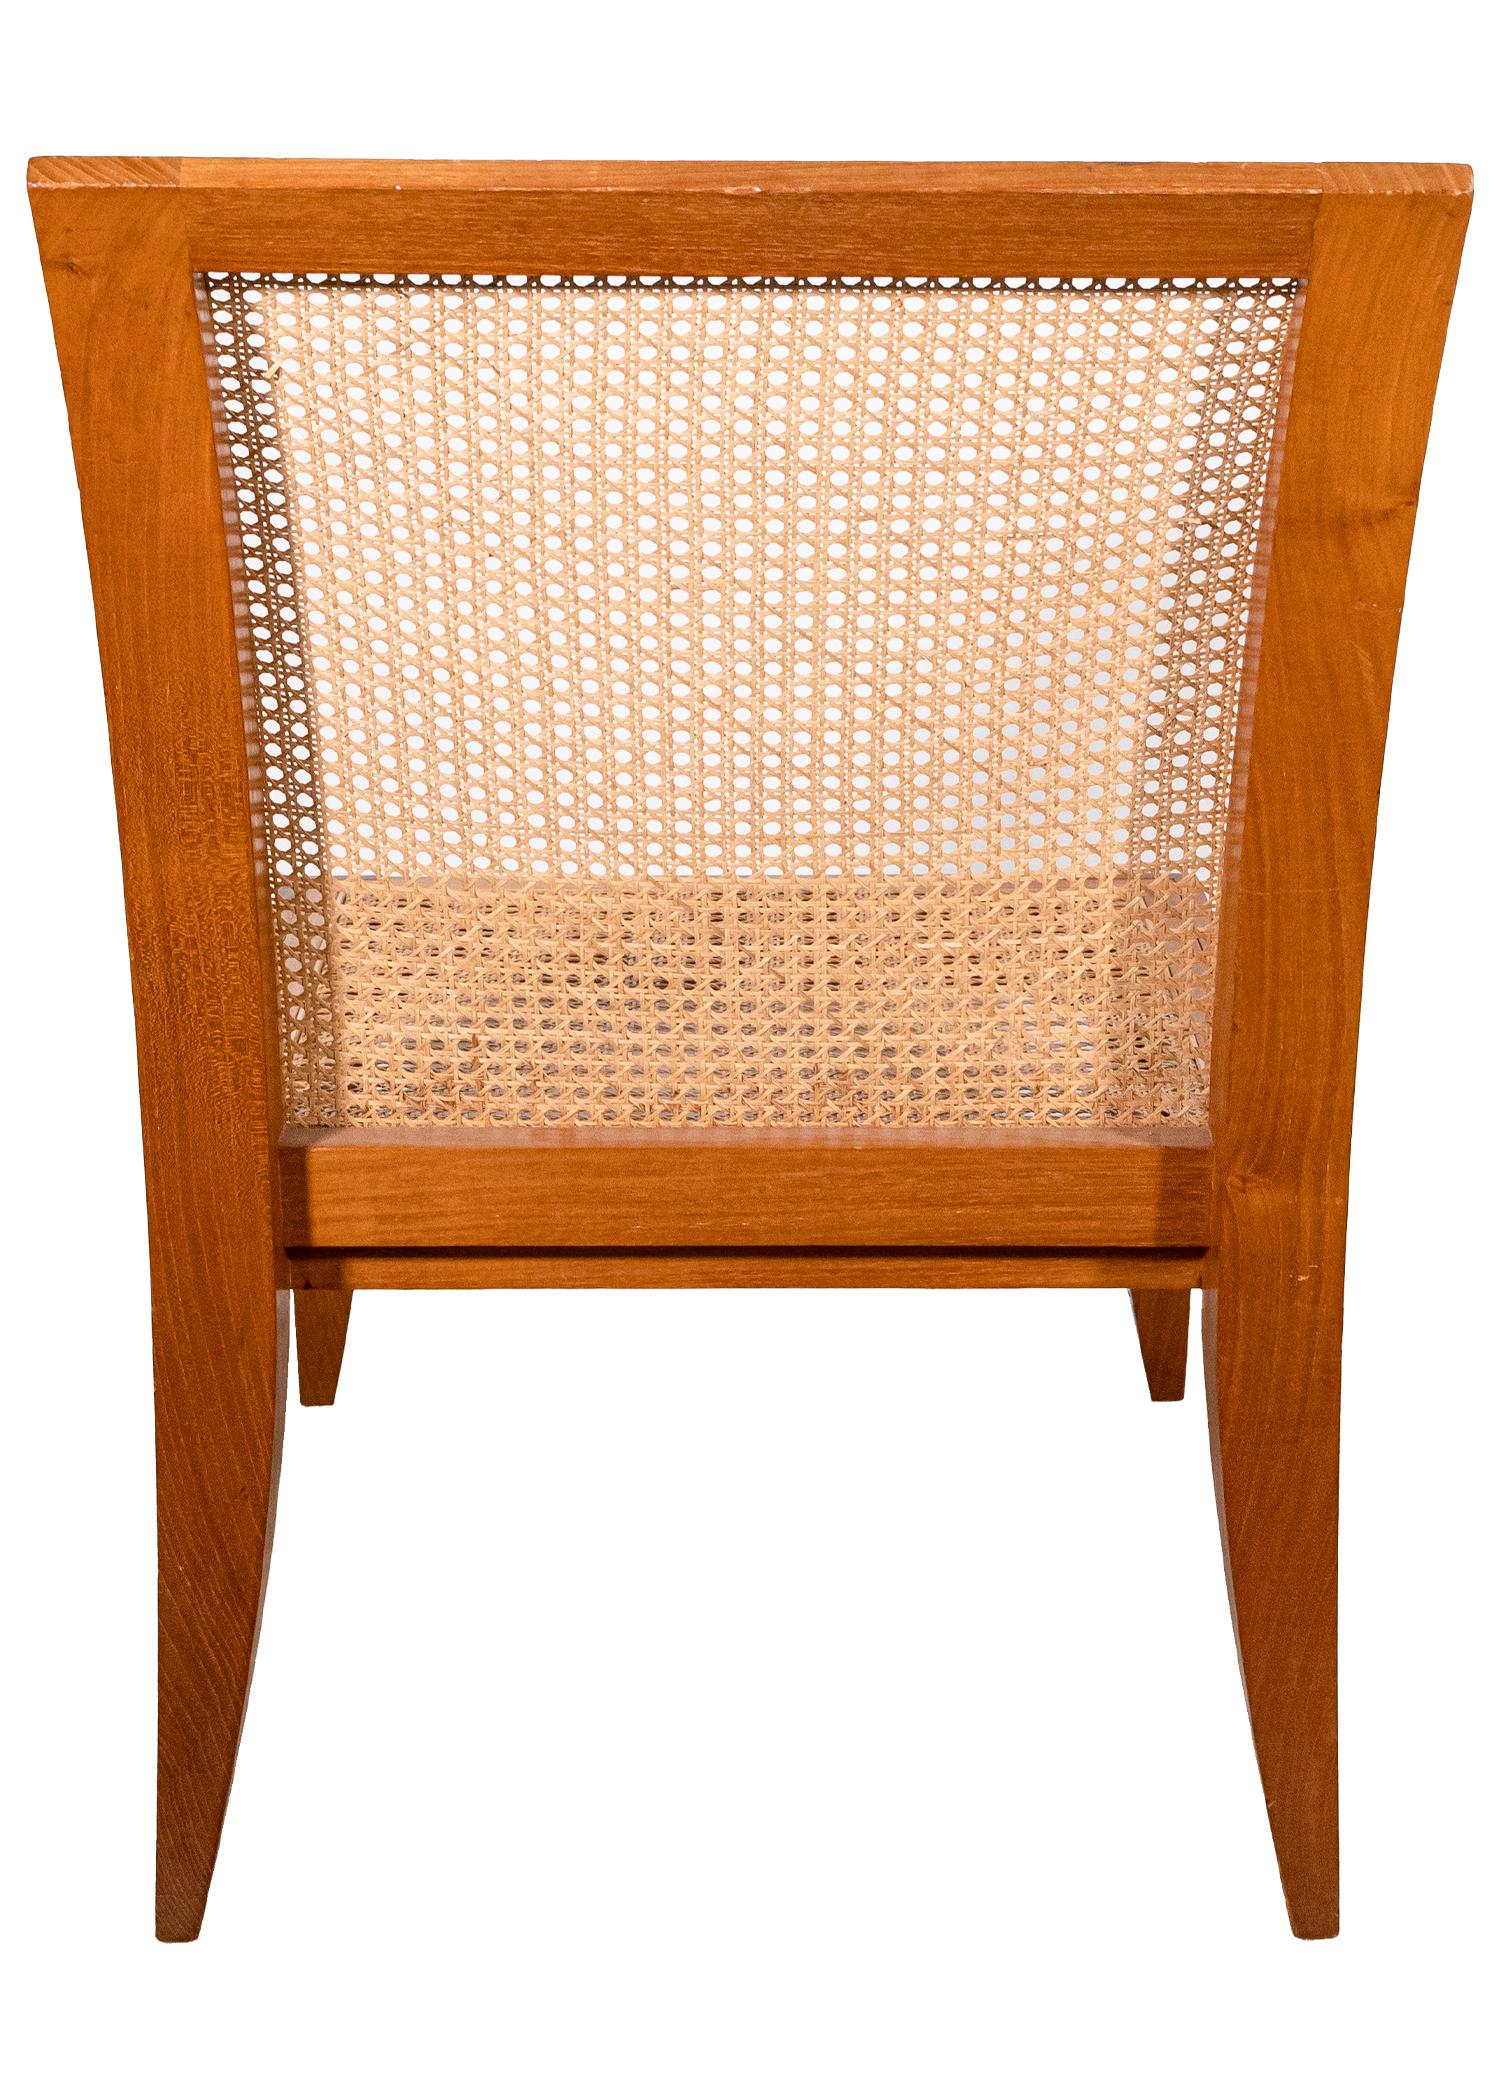 20th Century Mid-Century Modern Donghia Rattan Cane Jeanerret Style Chair